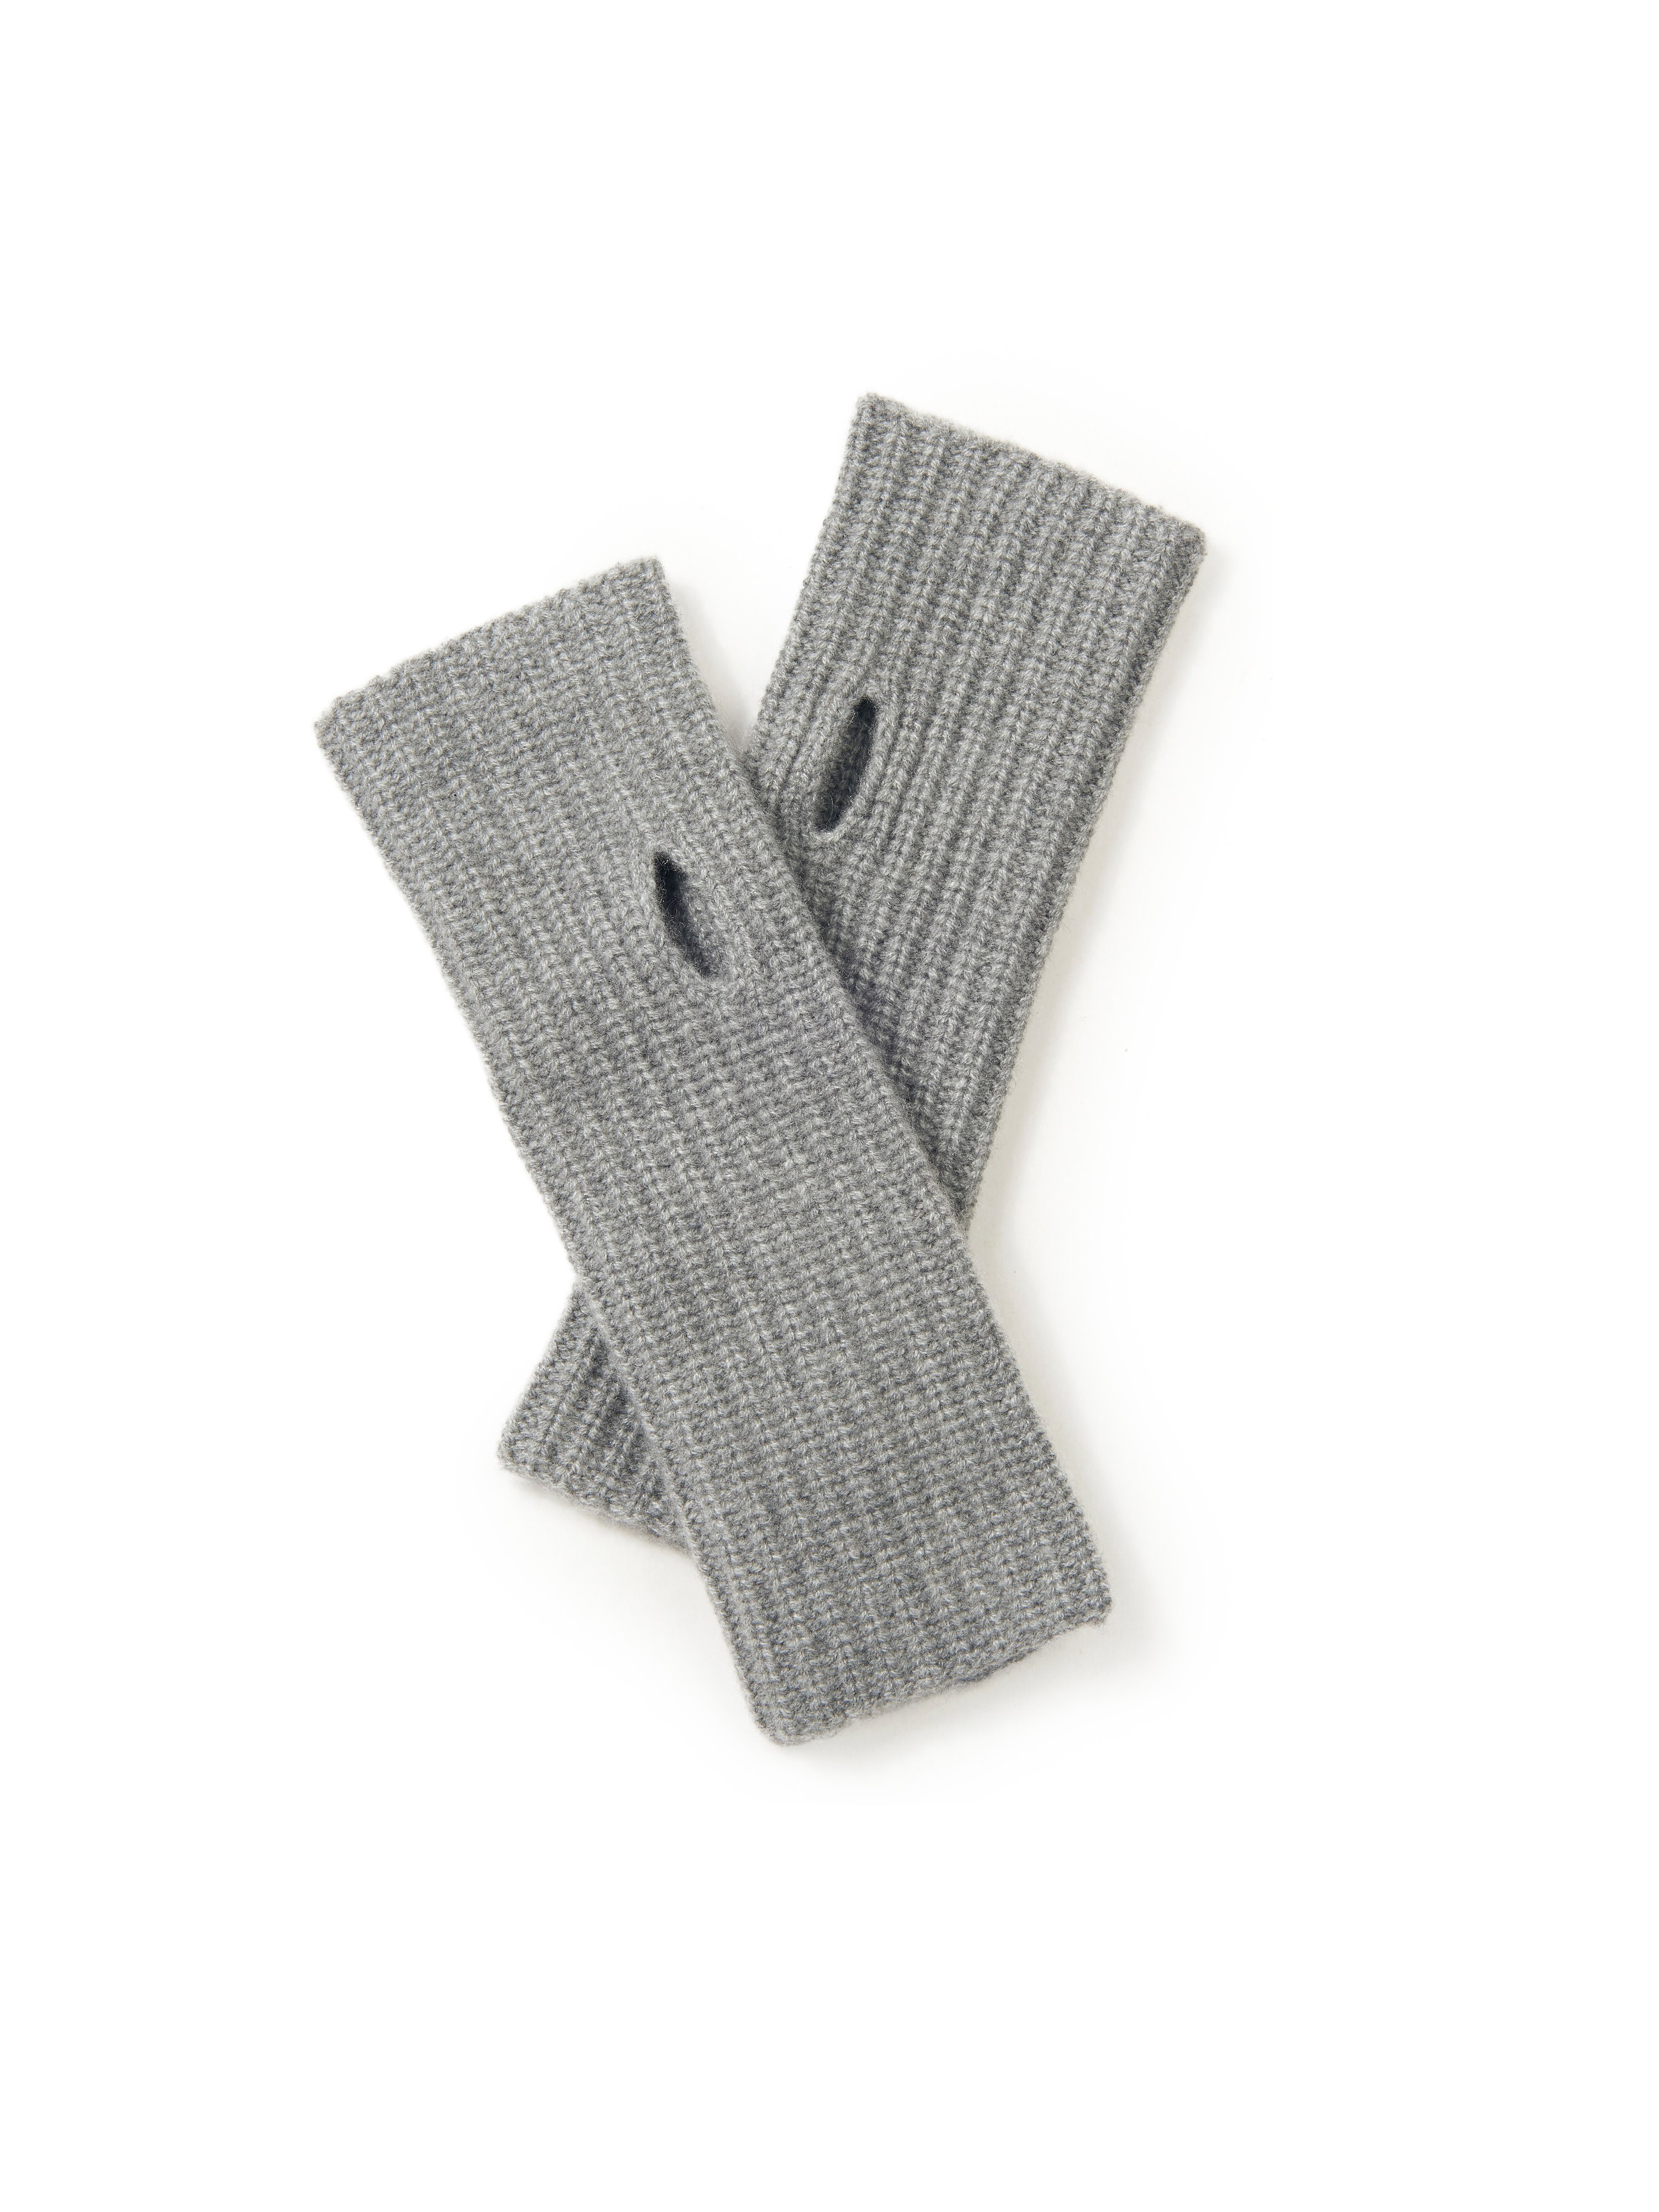 Arm warmers in 100% cashmere include grey